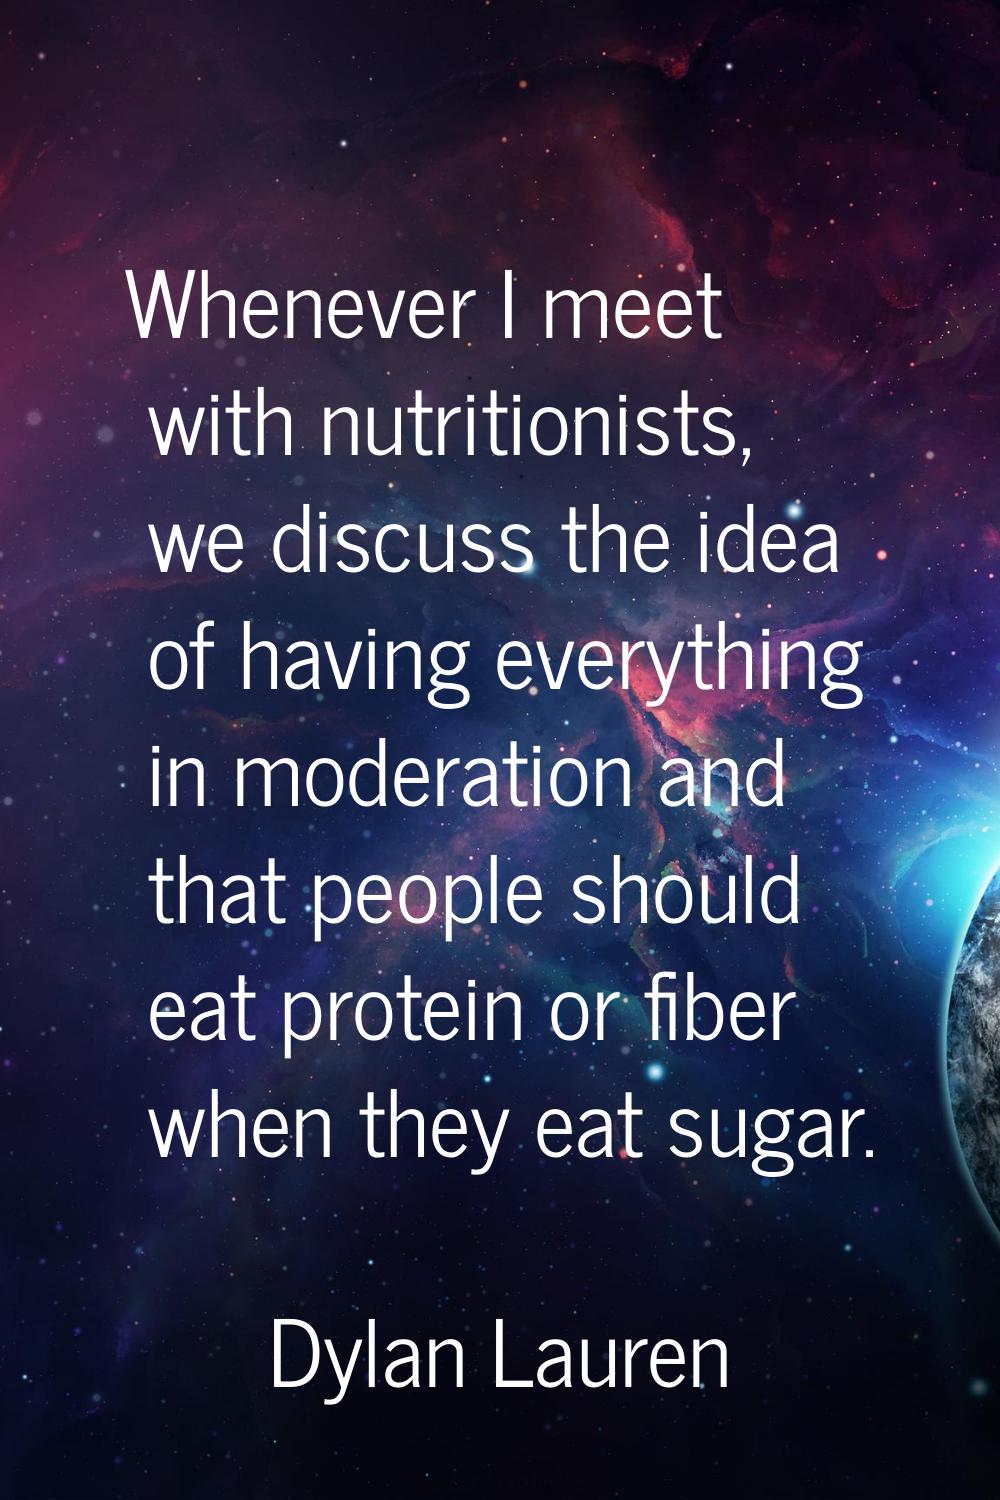 Whenever I meet with nutritionists, we discuss the idea of having everything in moderation and that